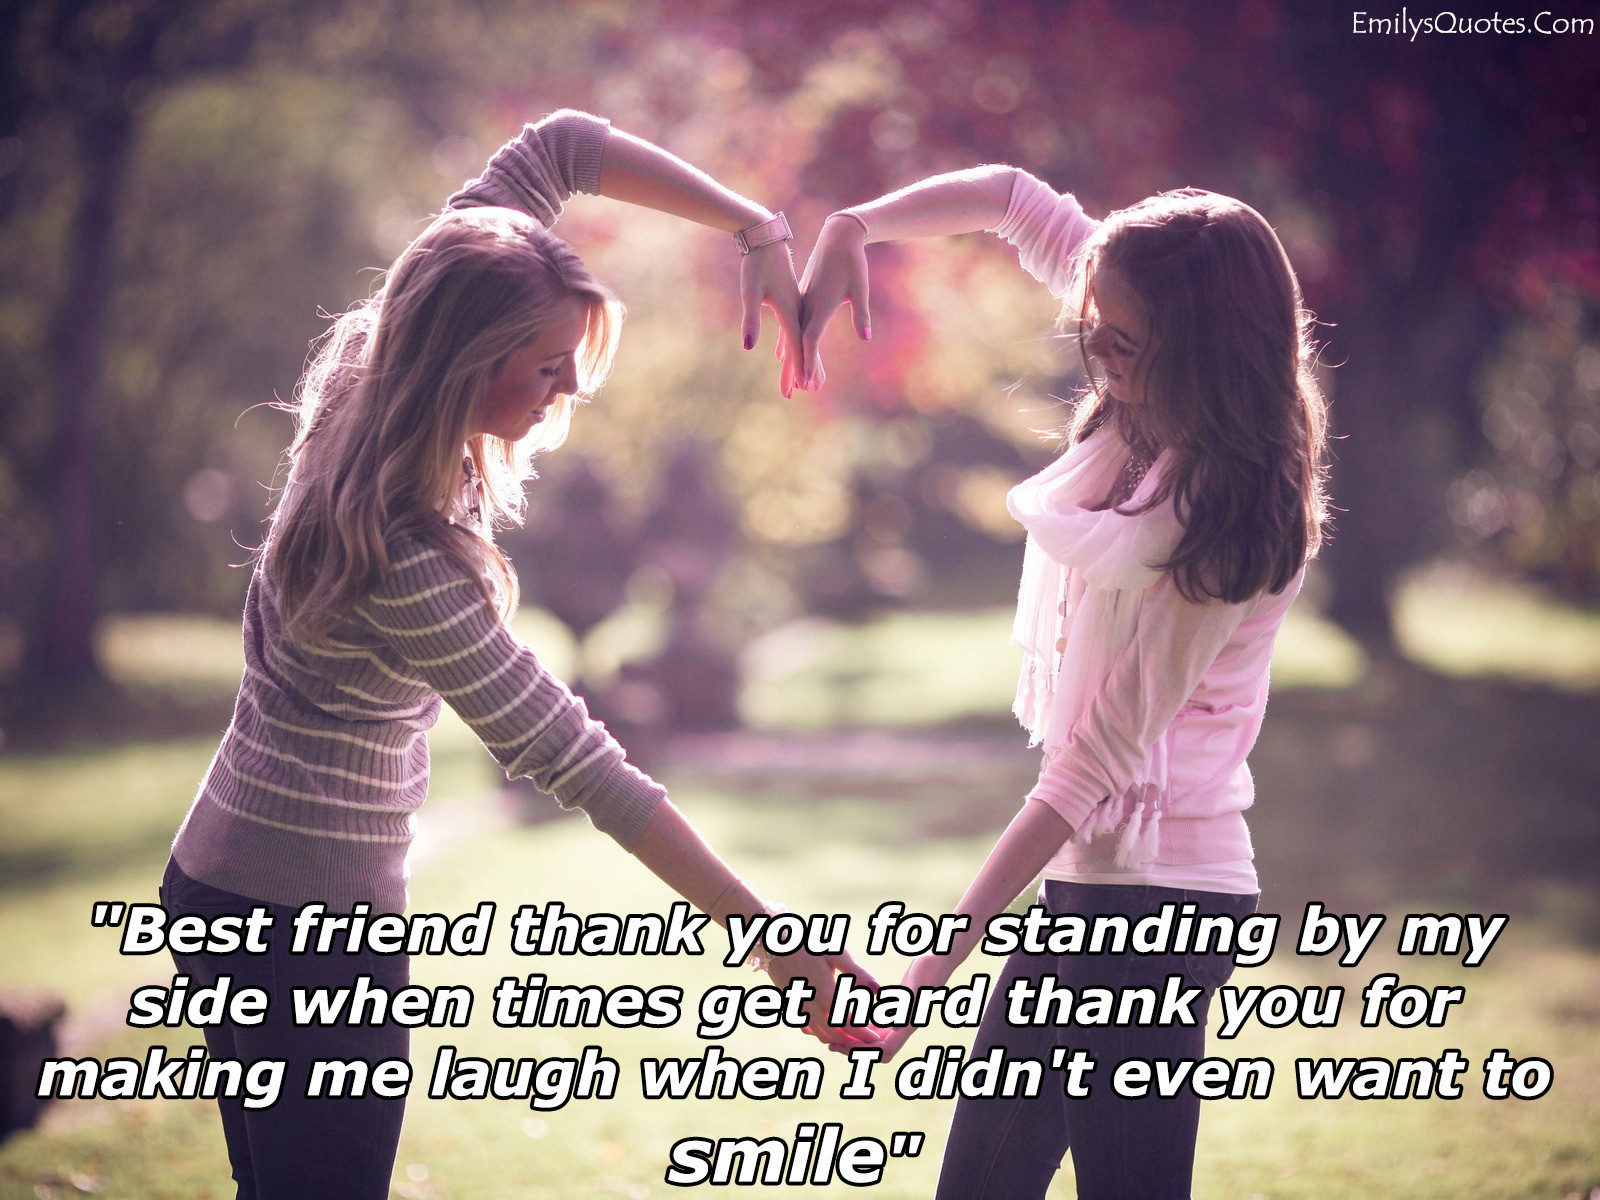 Friendship Relationship Quotes
 Best friend thank you for standing by my side when times